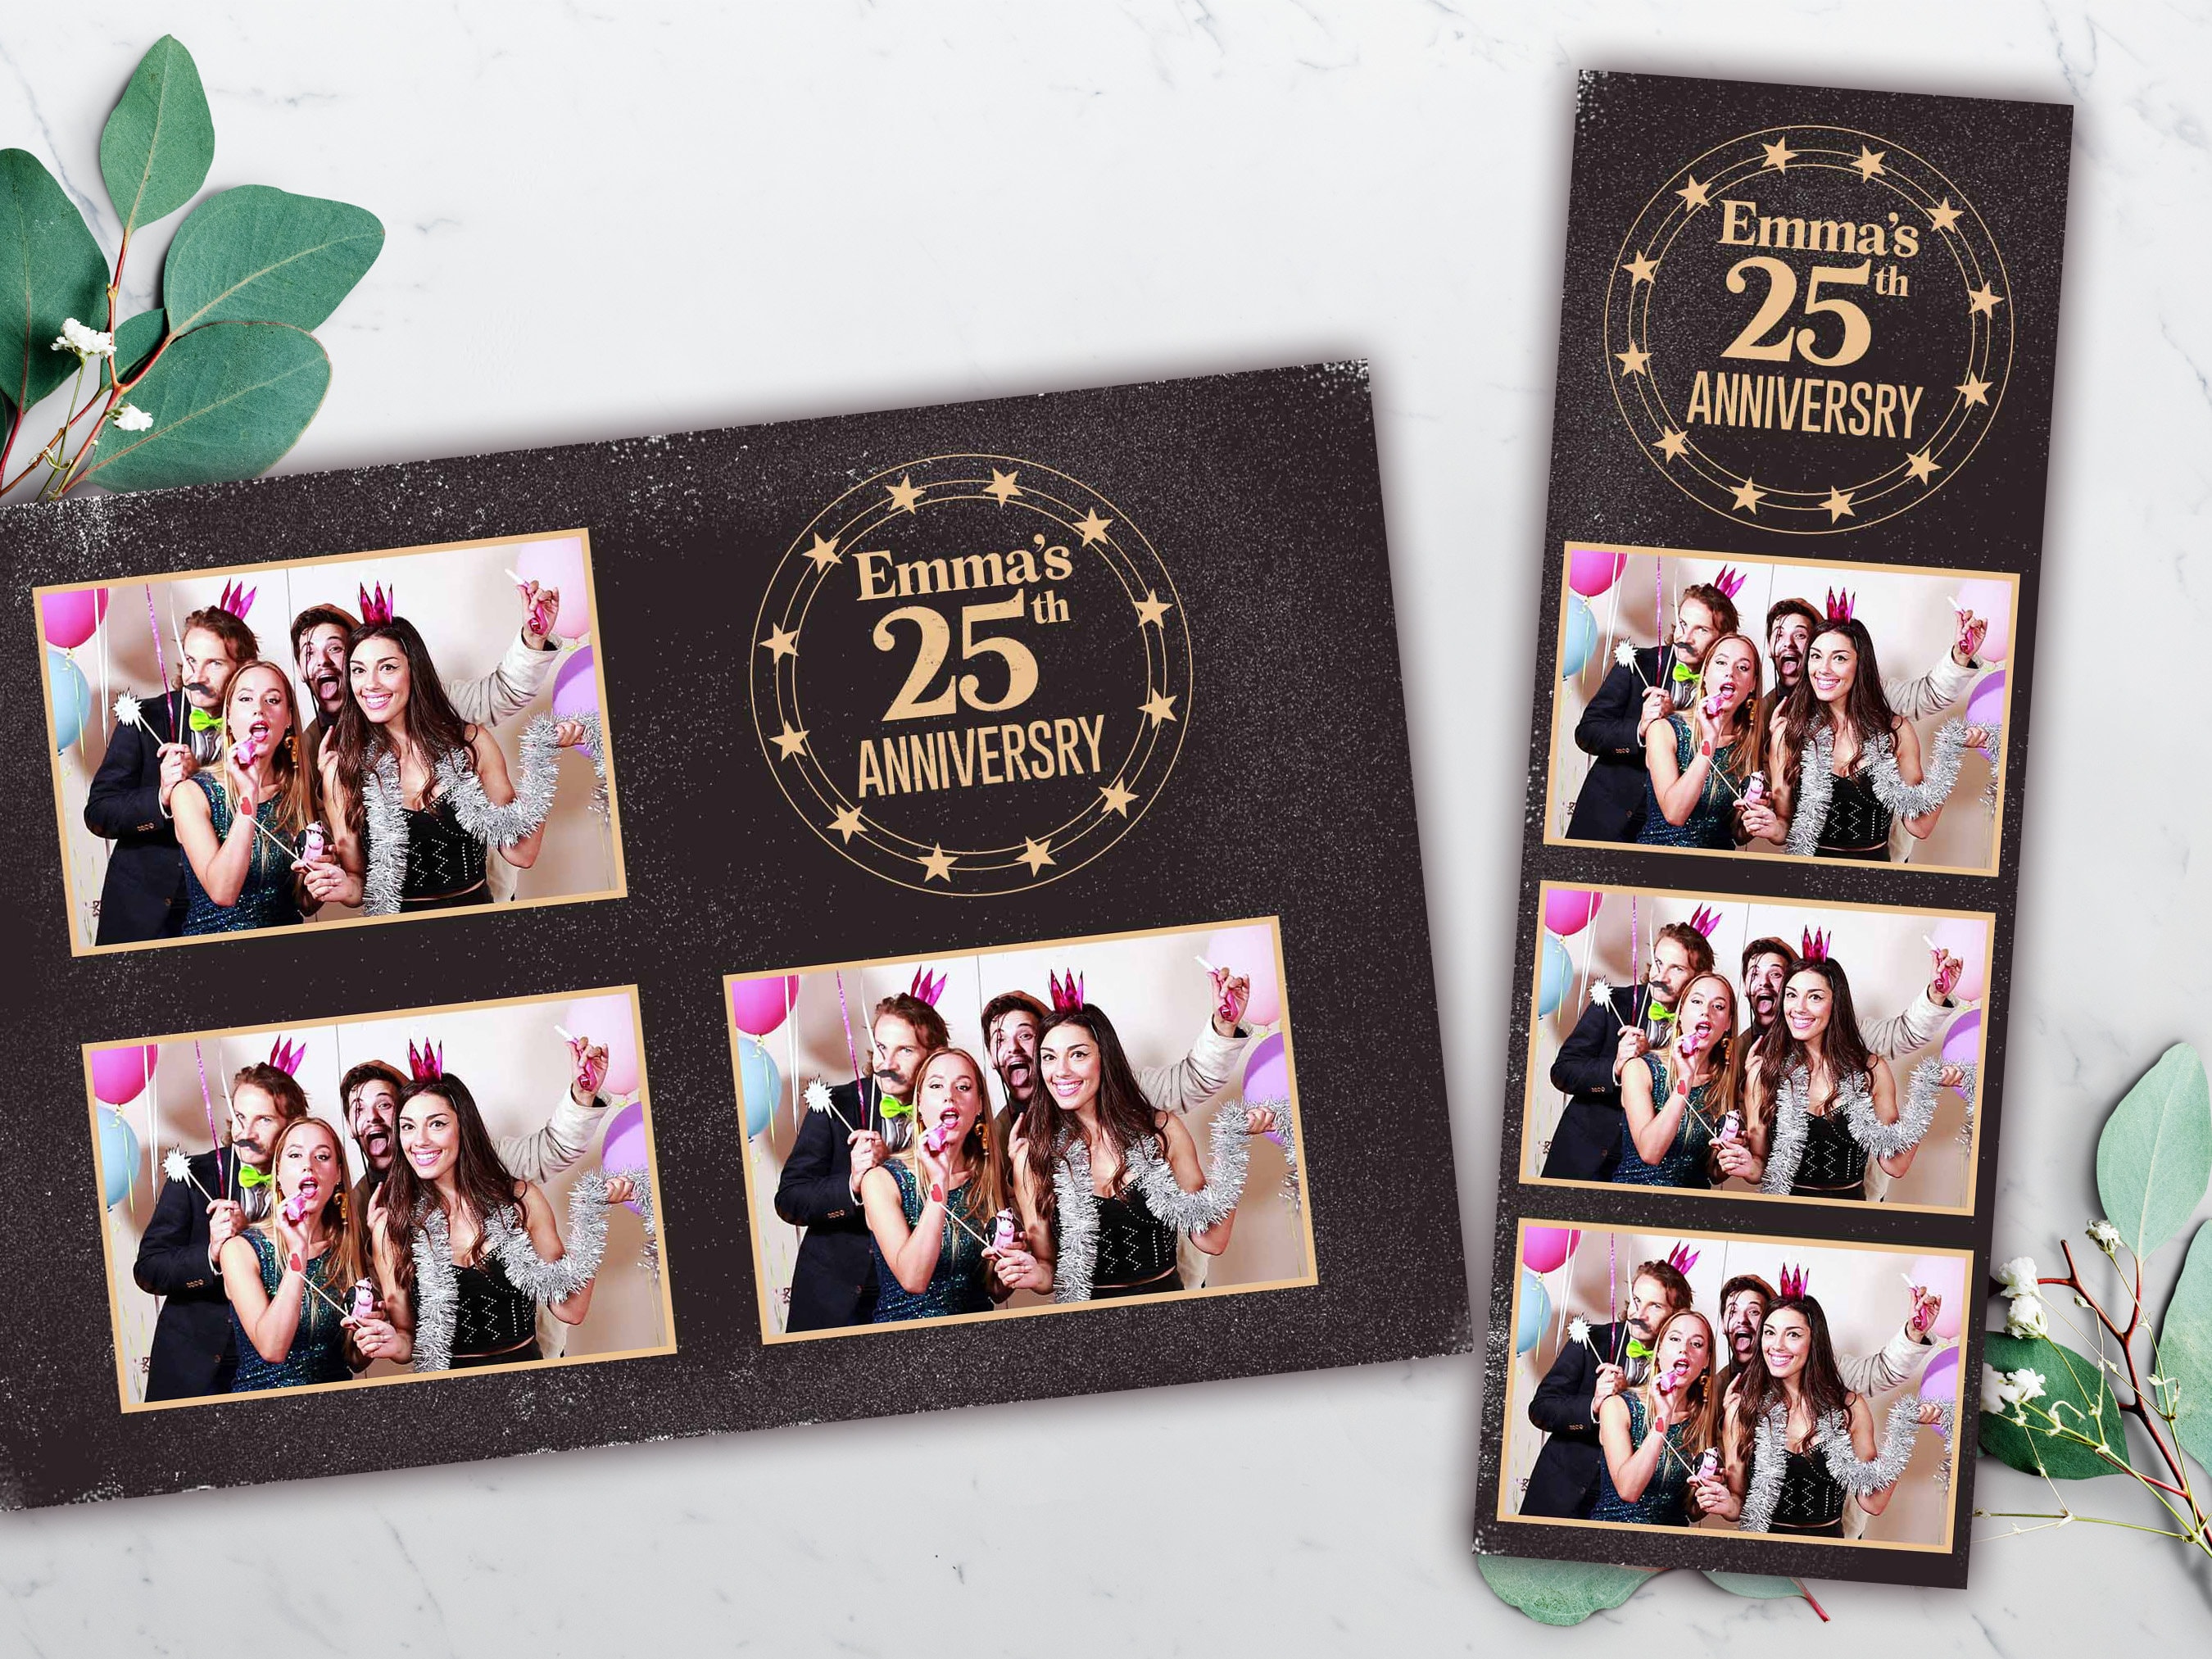  Photo Booth Photo Album - For Wedding or Party- Holds 120  Photobooth 2x6 Photo Strips - Slide In, WHITE